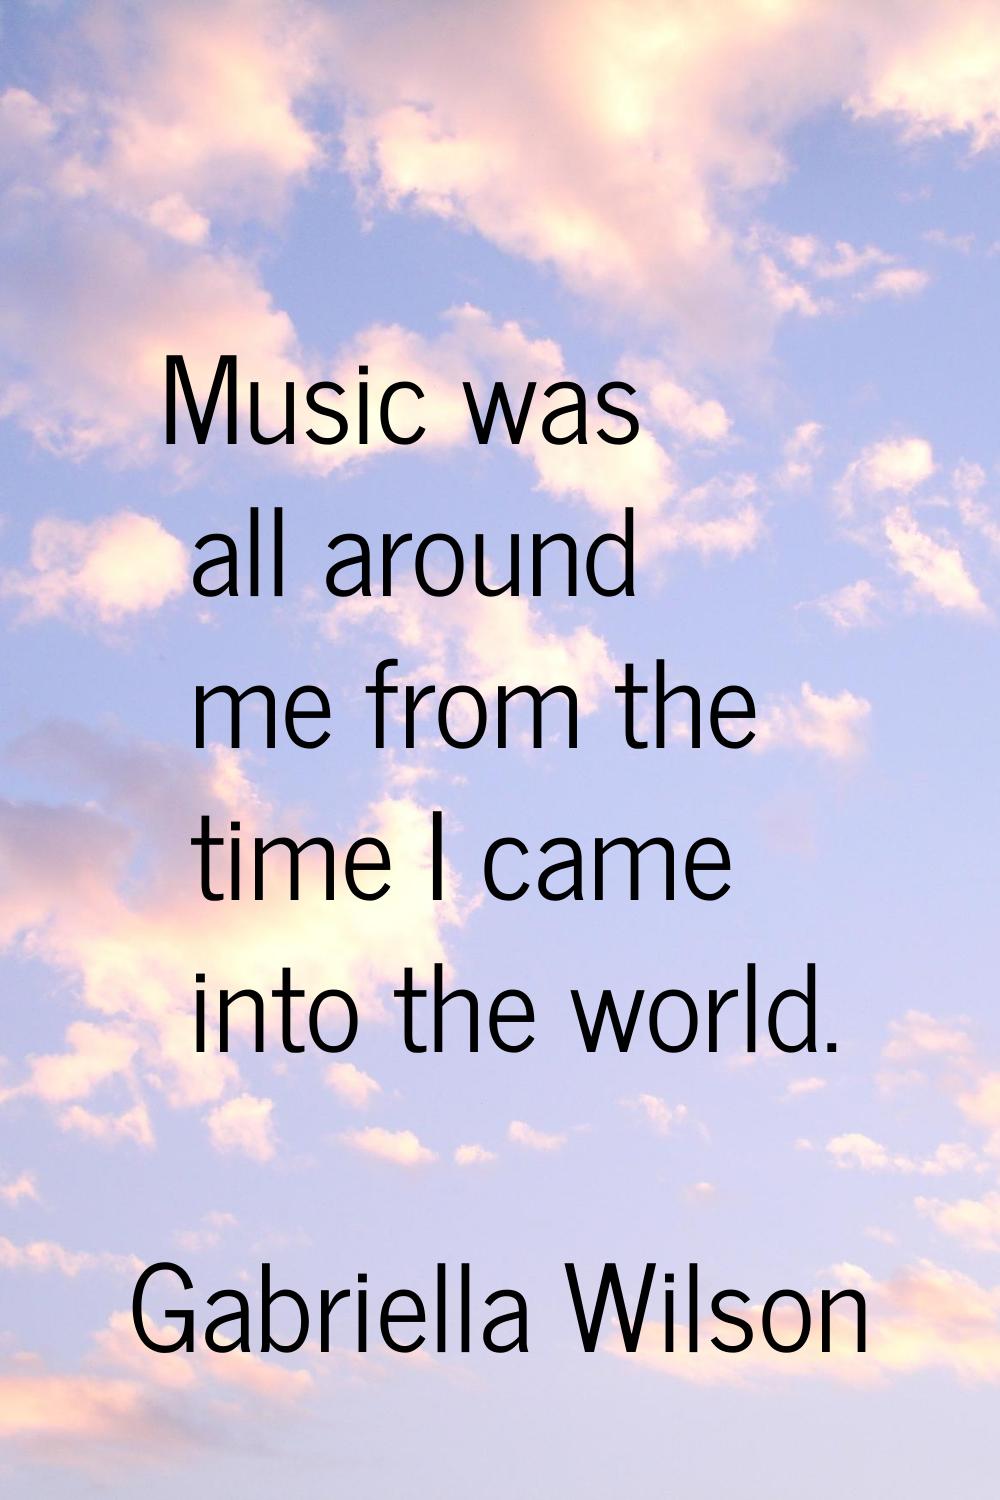 Music was all around me from the time I came into the world.